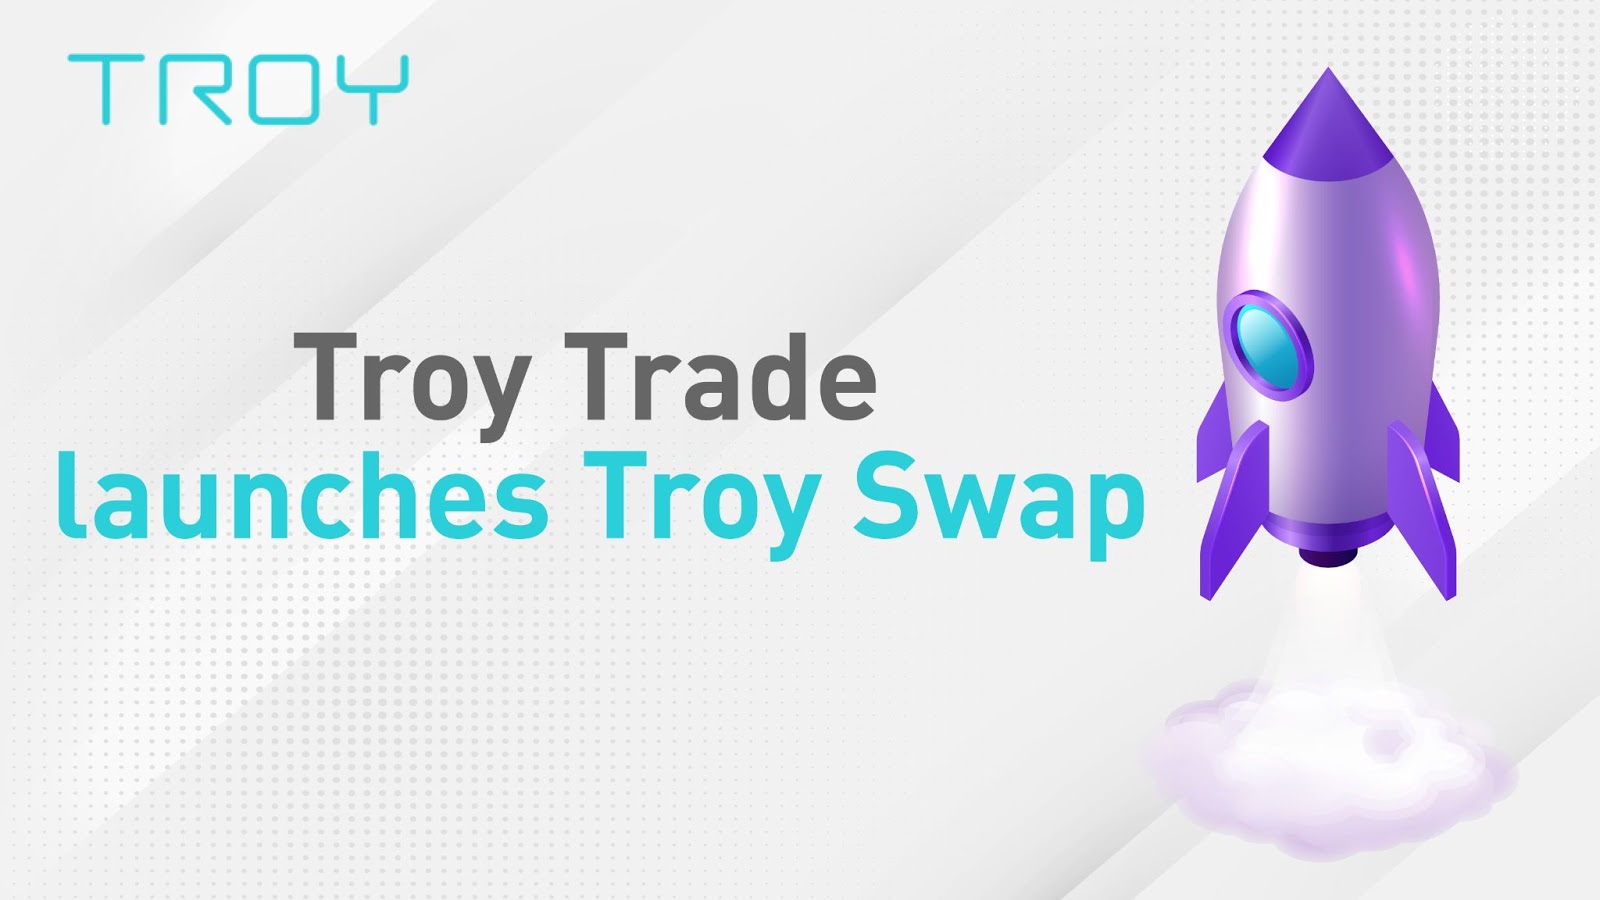 Troy-Trade-launches-Troy-Swap